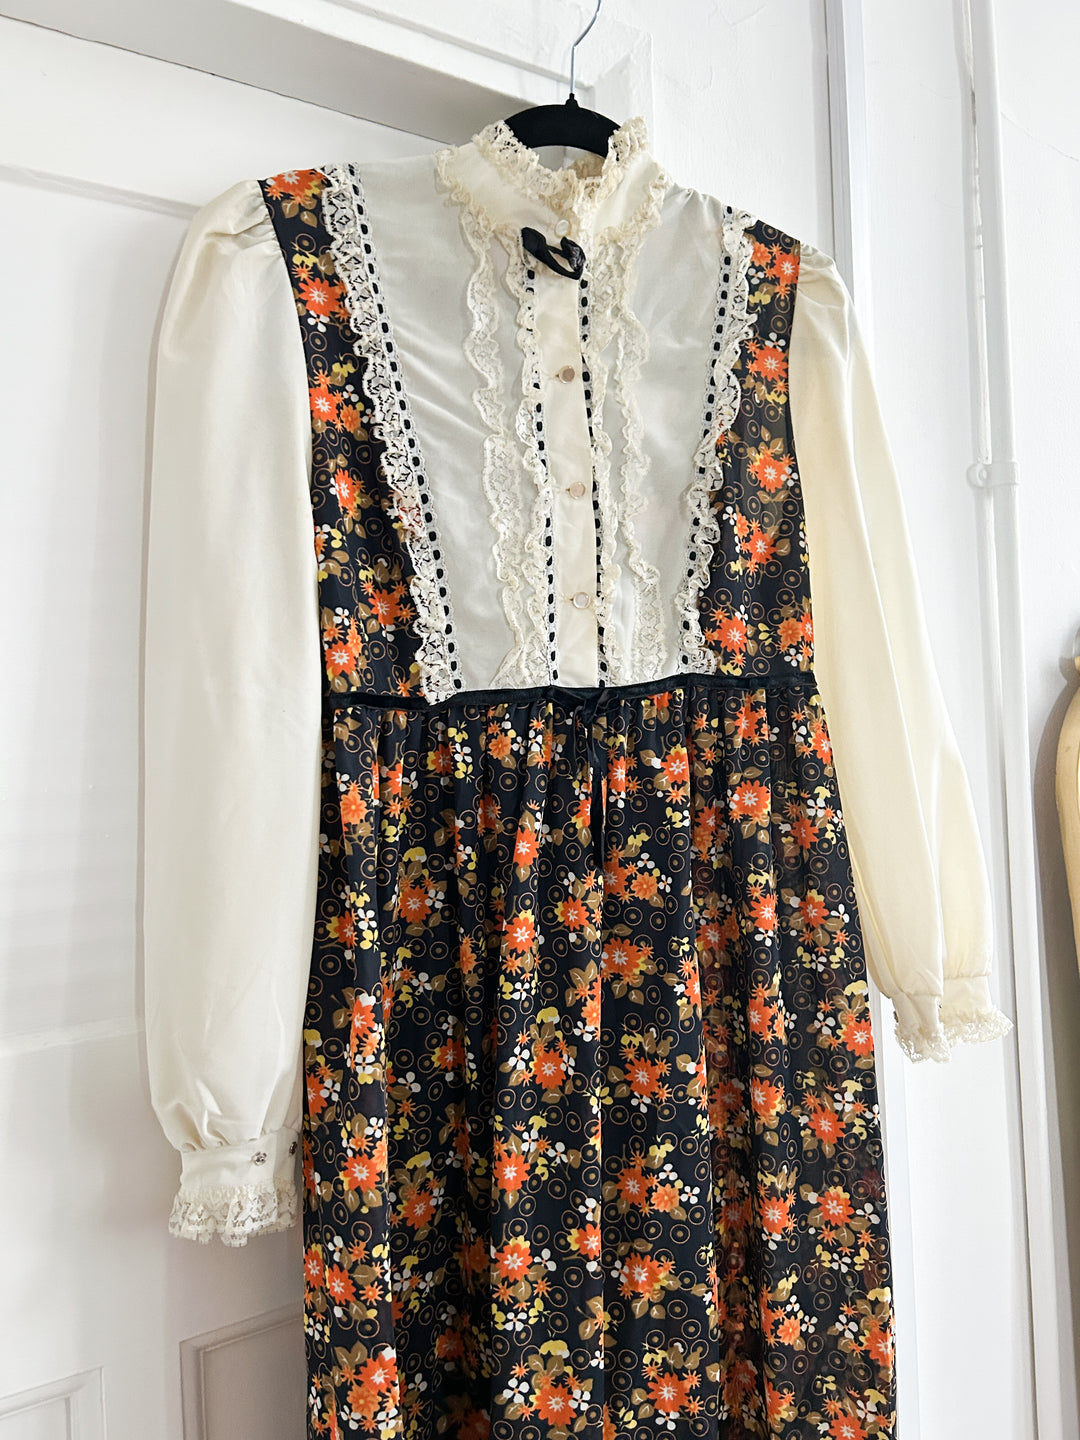 CUTE 70S FLORAL PRAIRIE DRESS APPROX UK SIZE 12